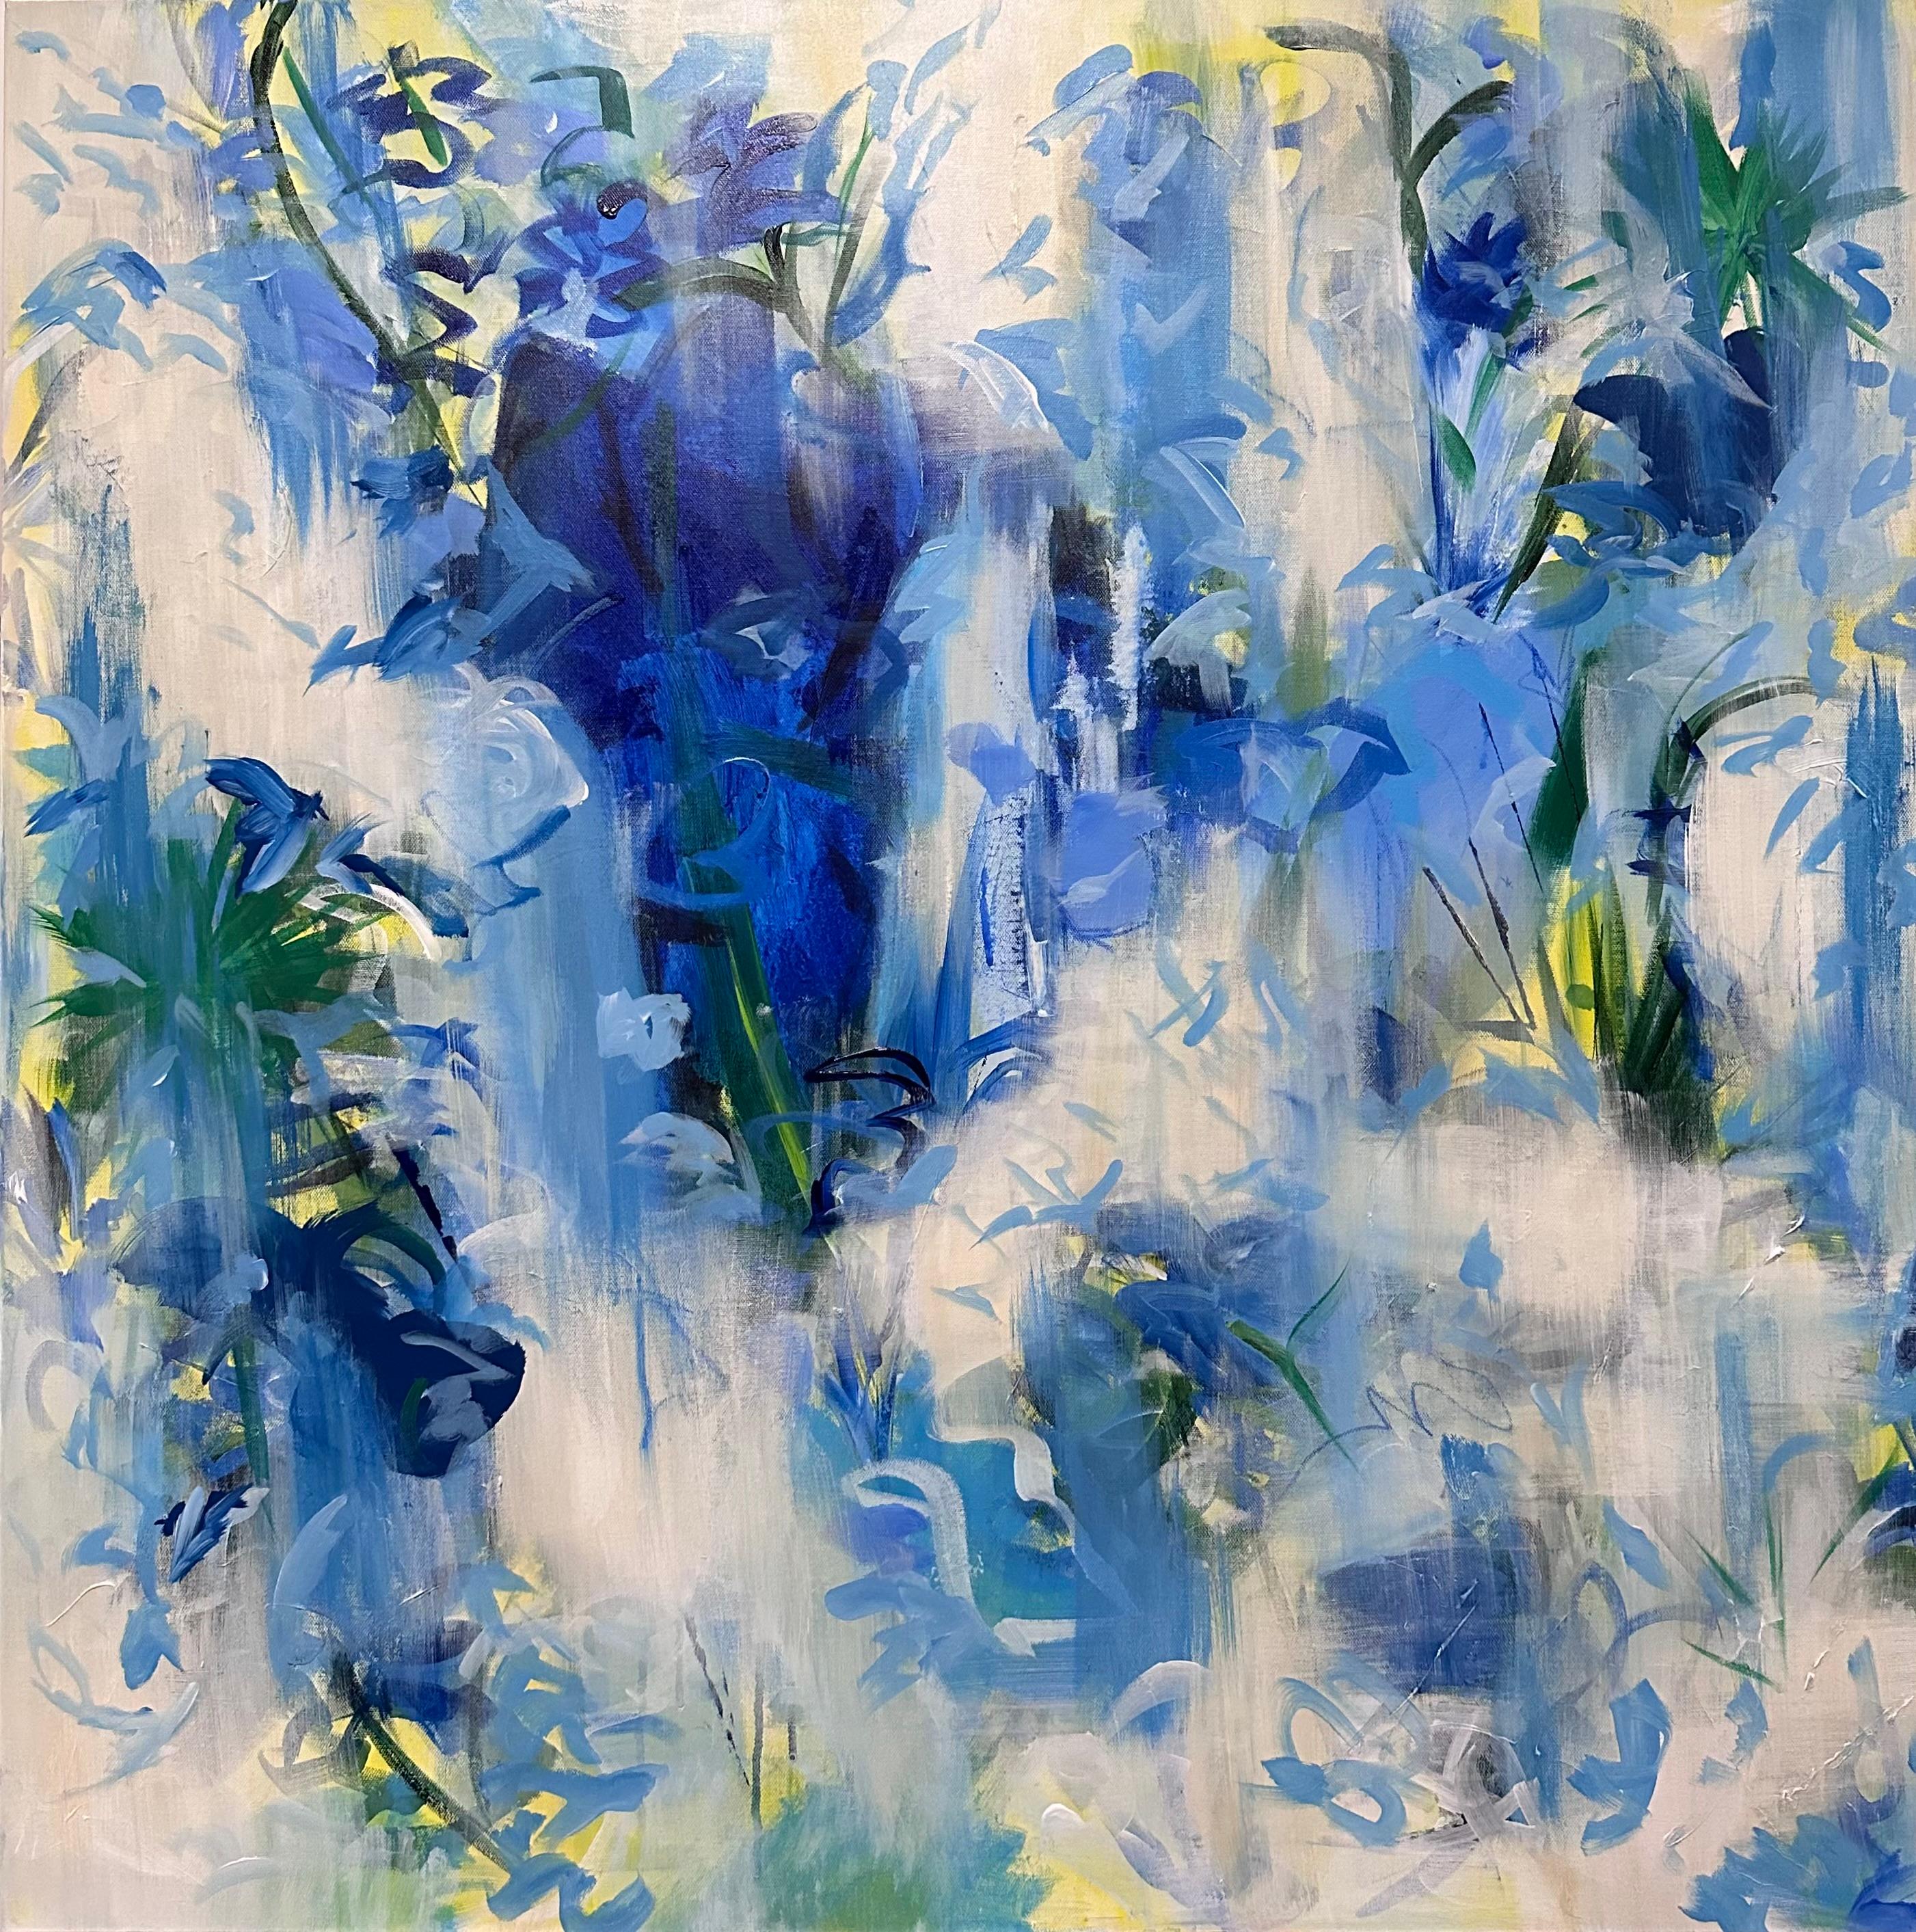 Abstract Painting Kimberly Marney - Spring is Sprung (bleu, blanc, jaune, floral, paysage, abstrait)